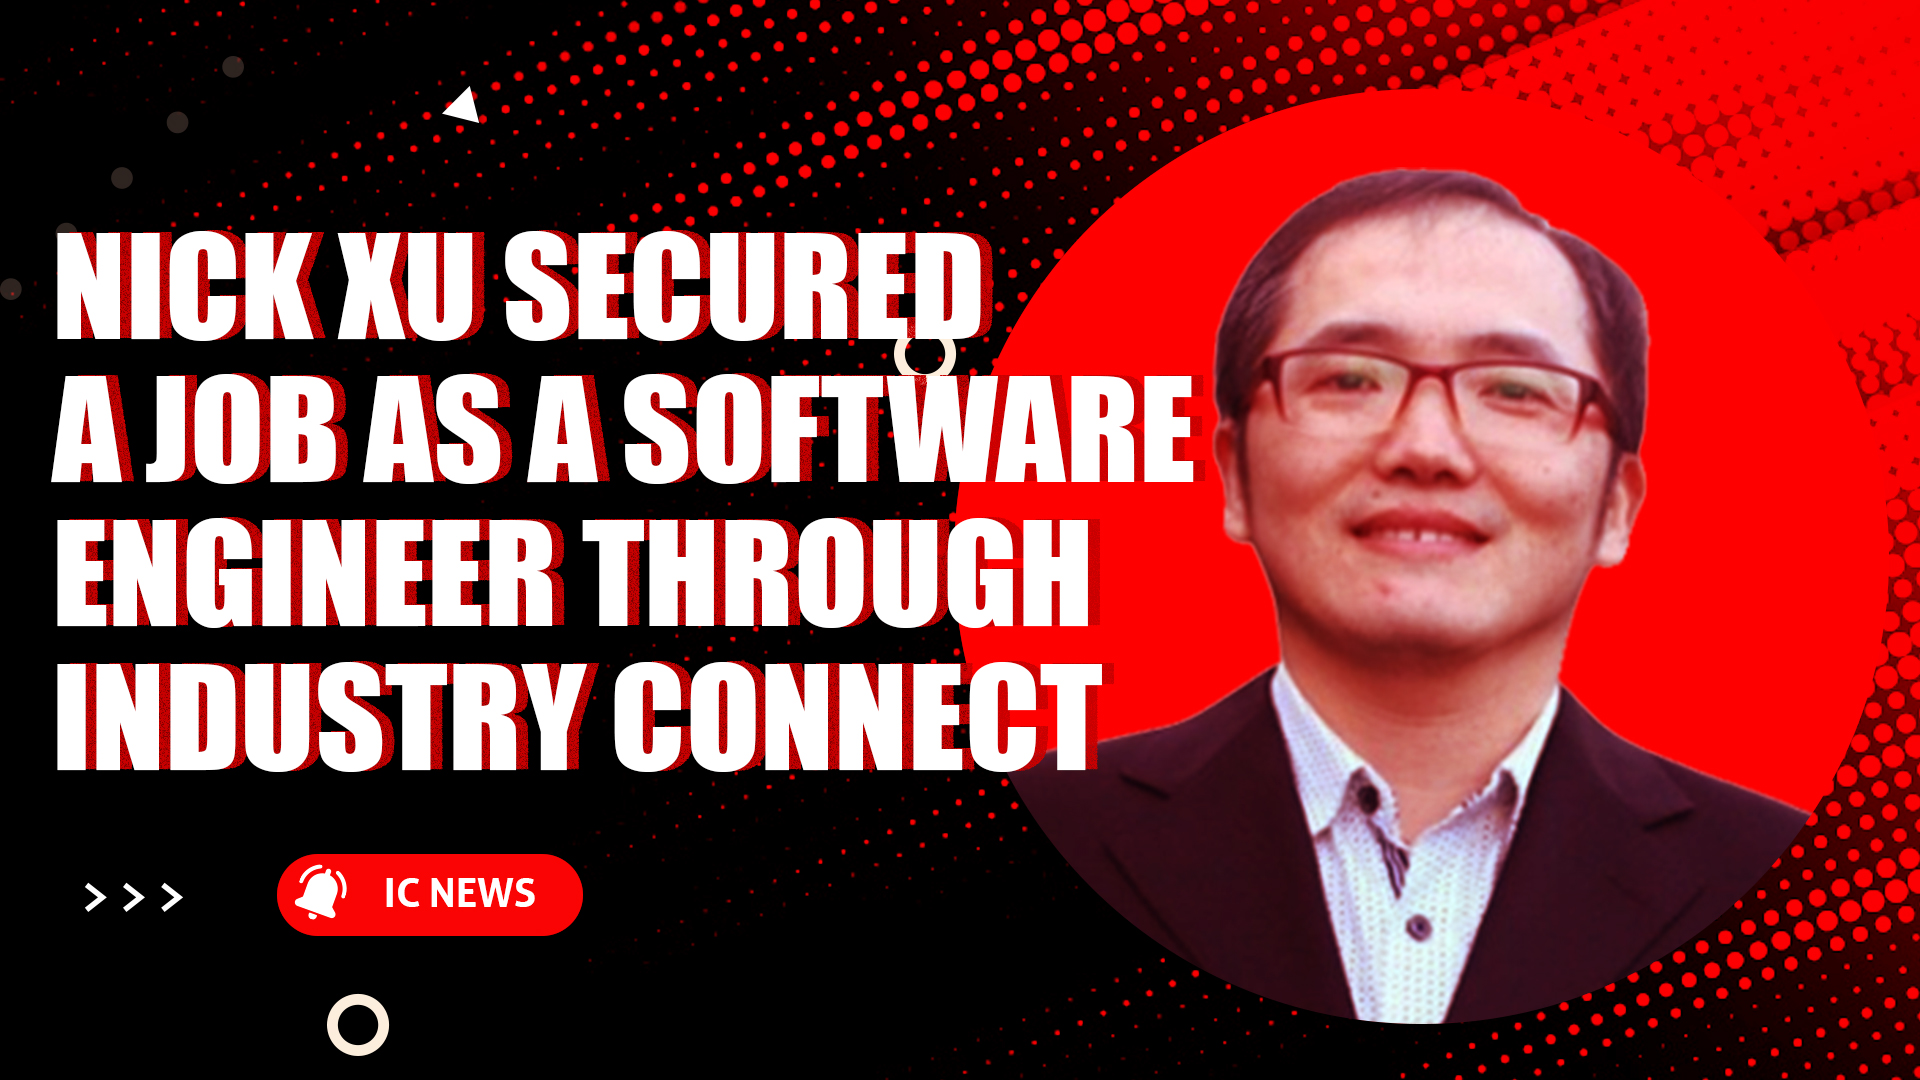 Nick Xu secured a job as a Software Engineer through Industry Connect